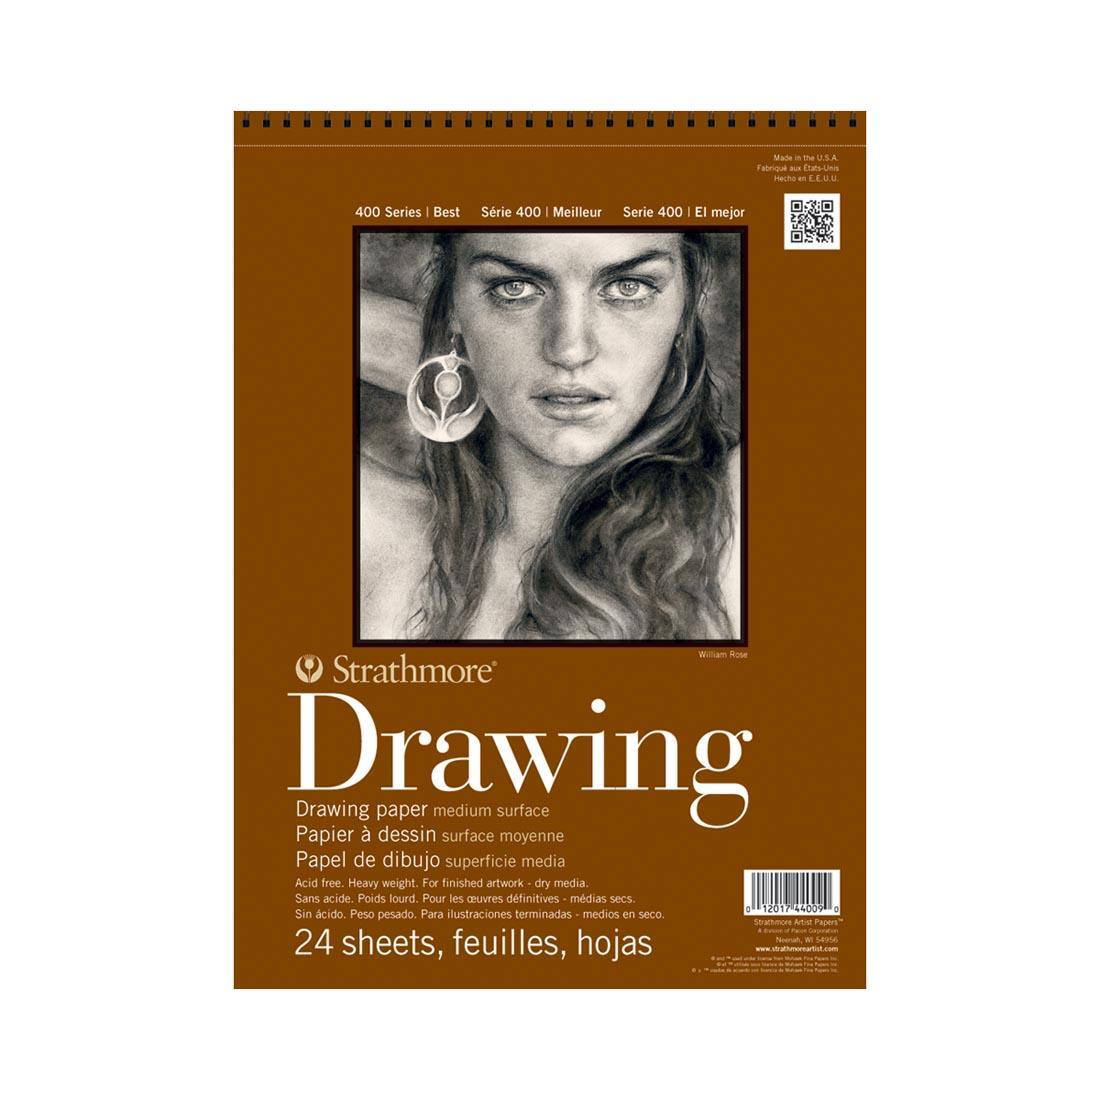 Strathmore 400 Series Drawing Paper Pad, measures 6 inches by 8 inches